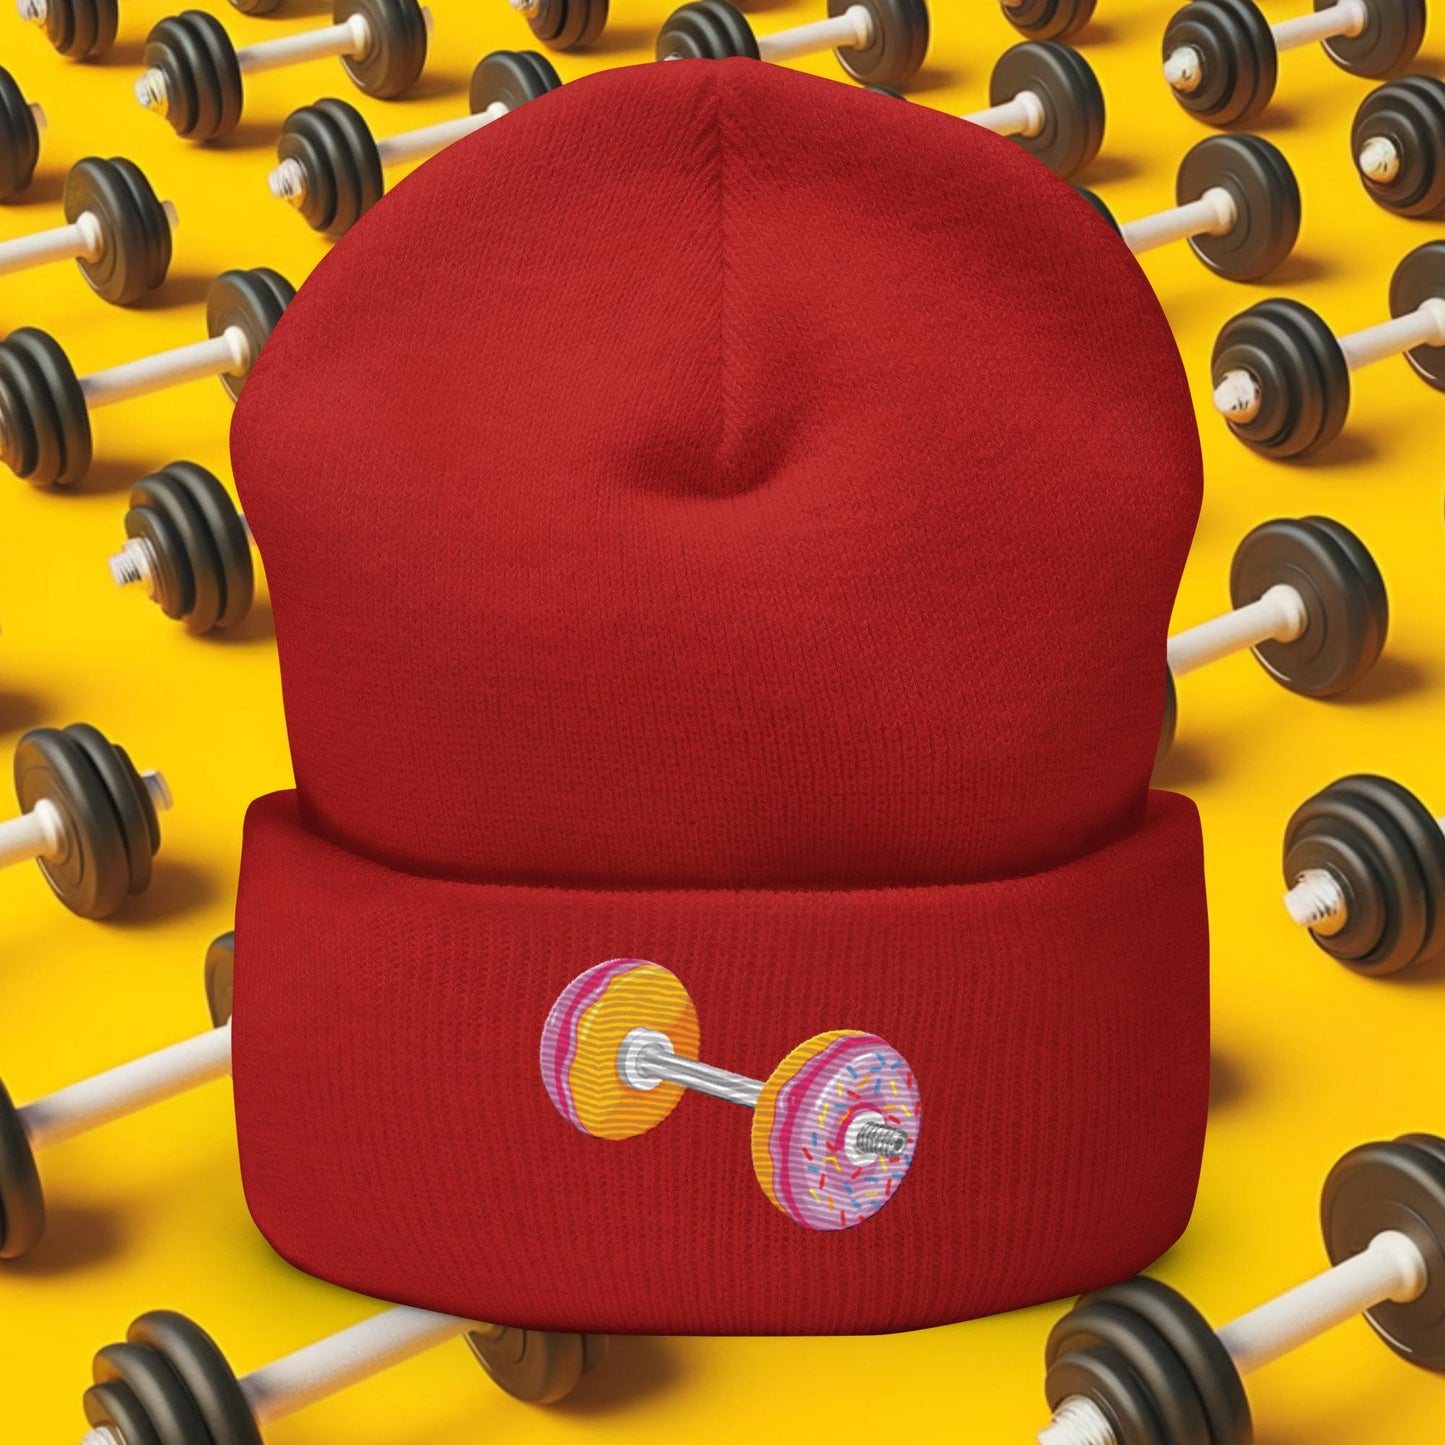 Donut Dumbbell Donuts Barbell Funny Bulk Diet Gym Workout Fitness Bodybuilding Cuffed Beanie Next Cult Brand